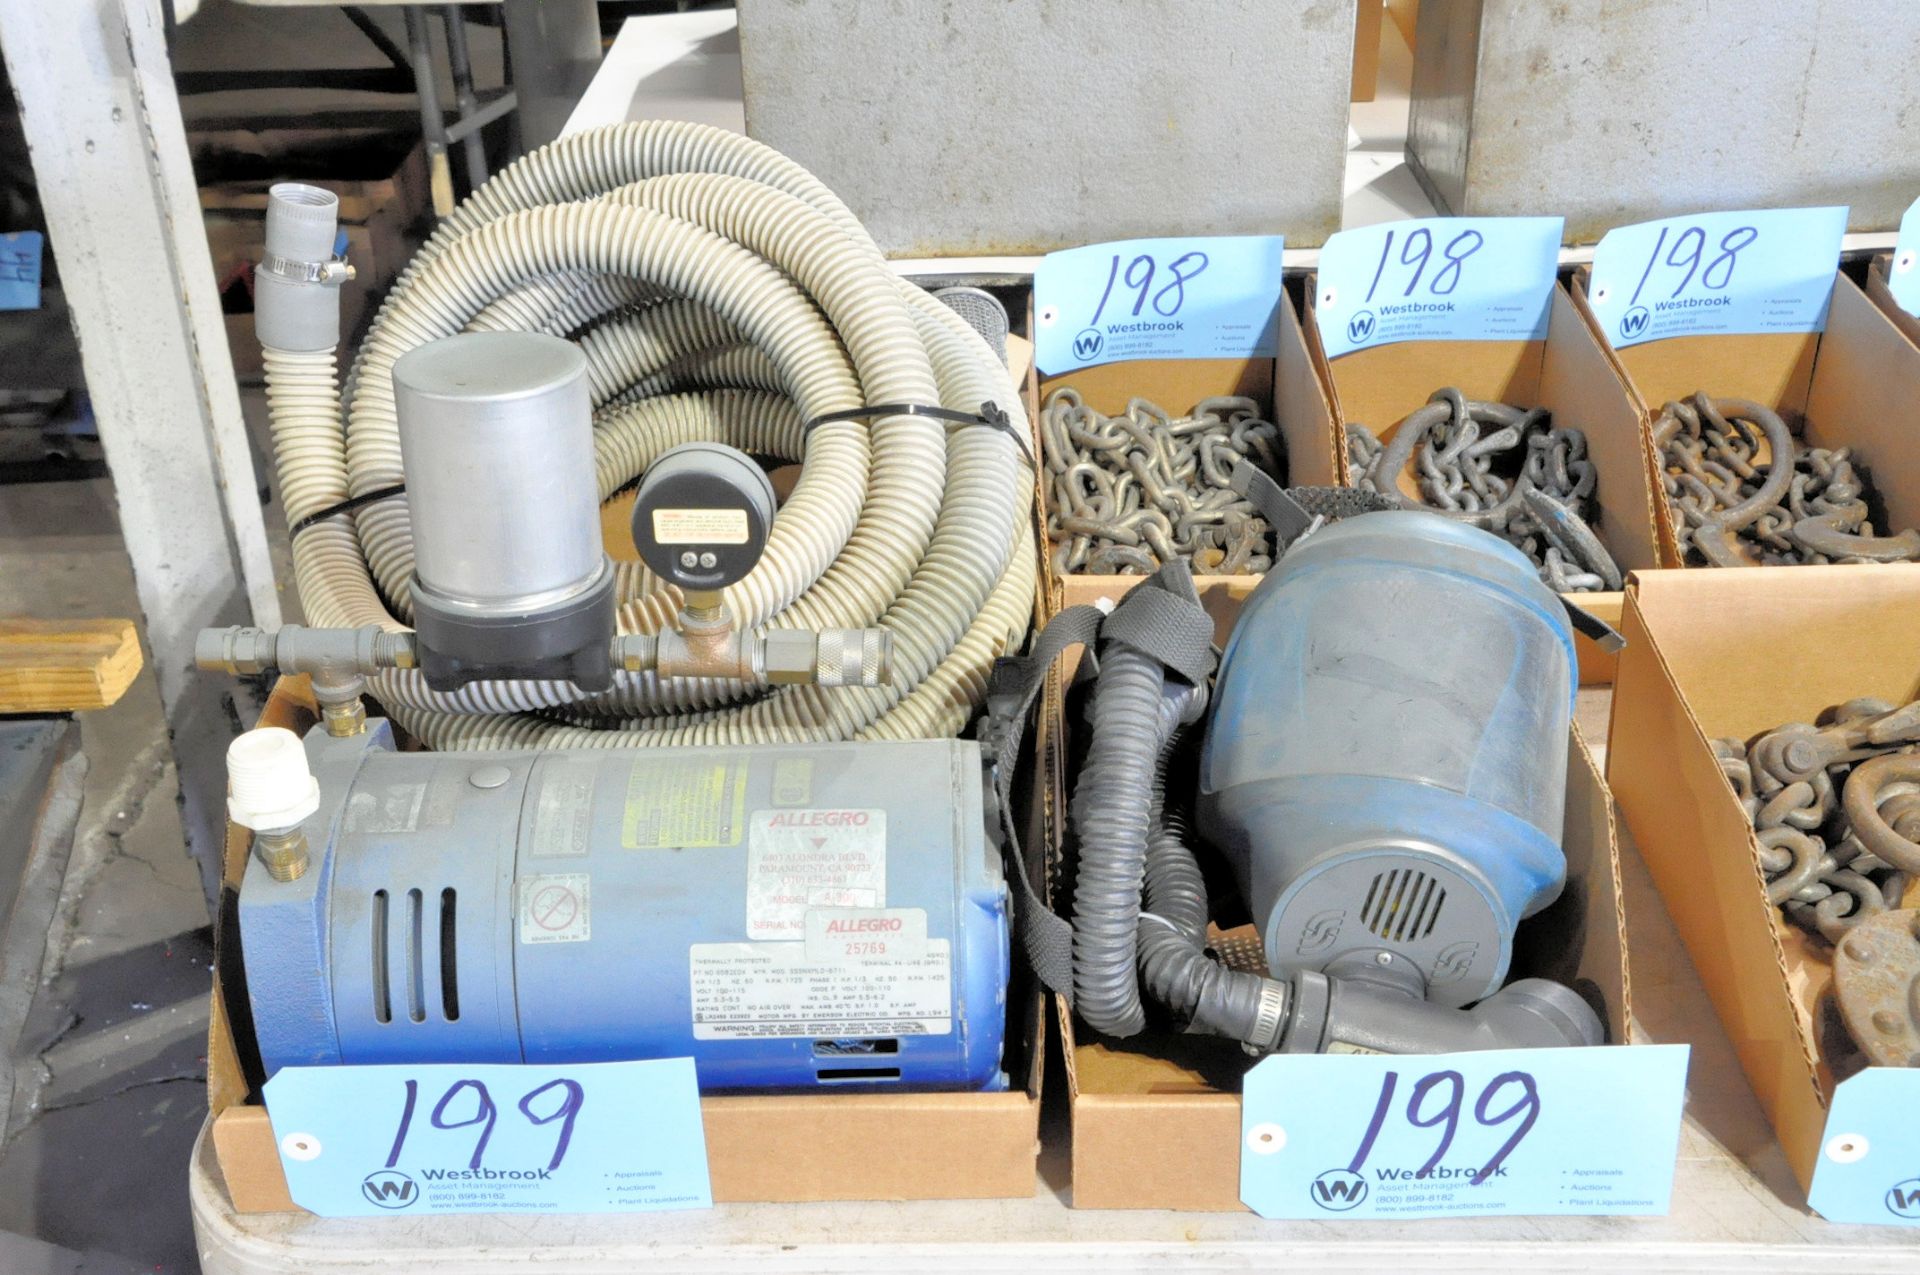 Gast Vacuum Pump with Hose and Respirator Mask with Filters in (3) Boxes